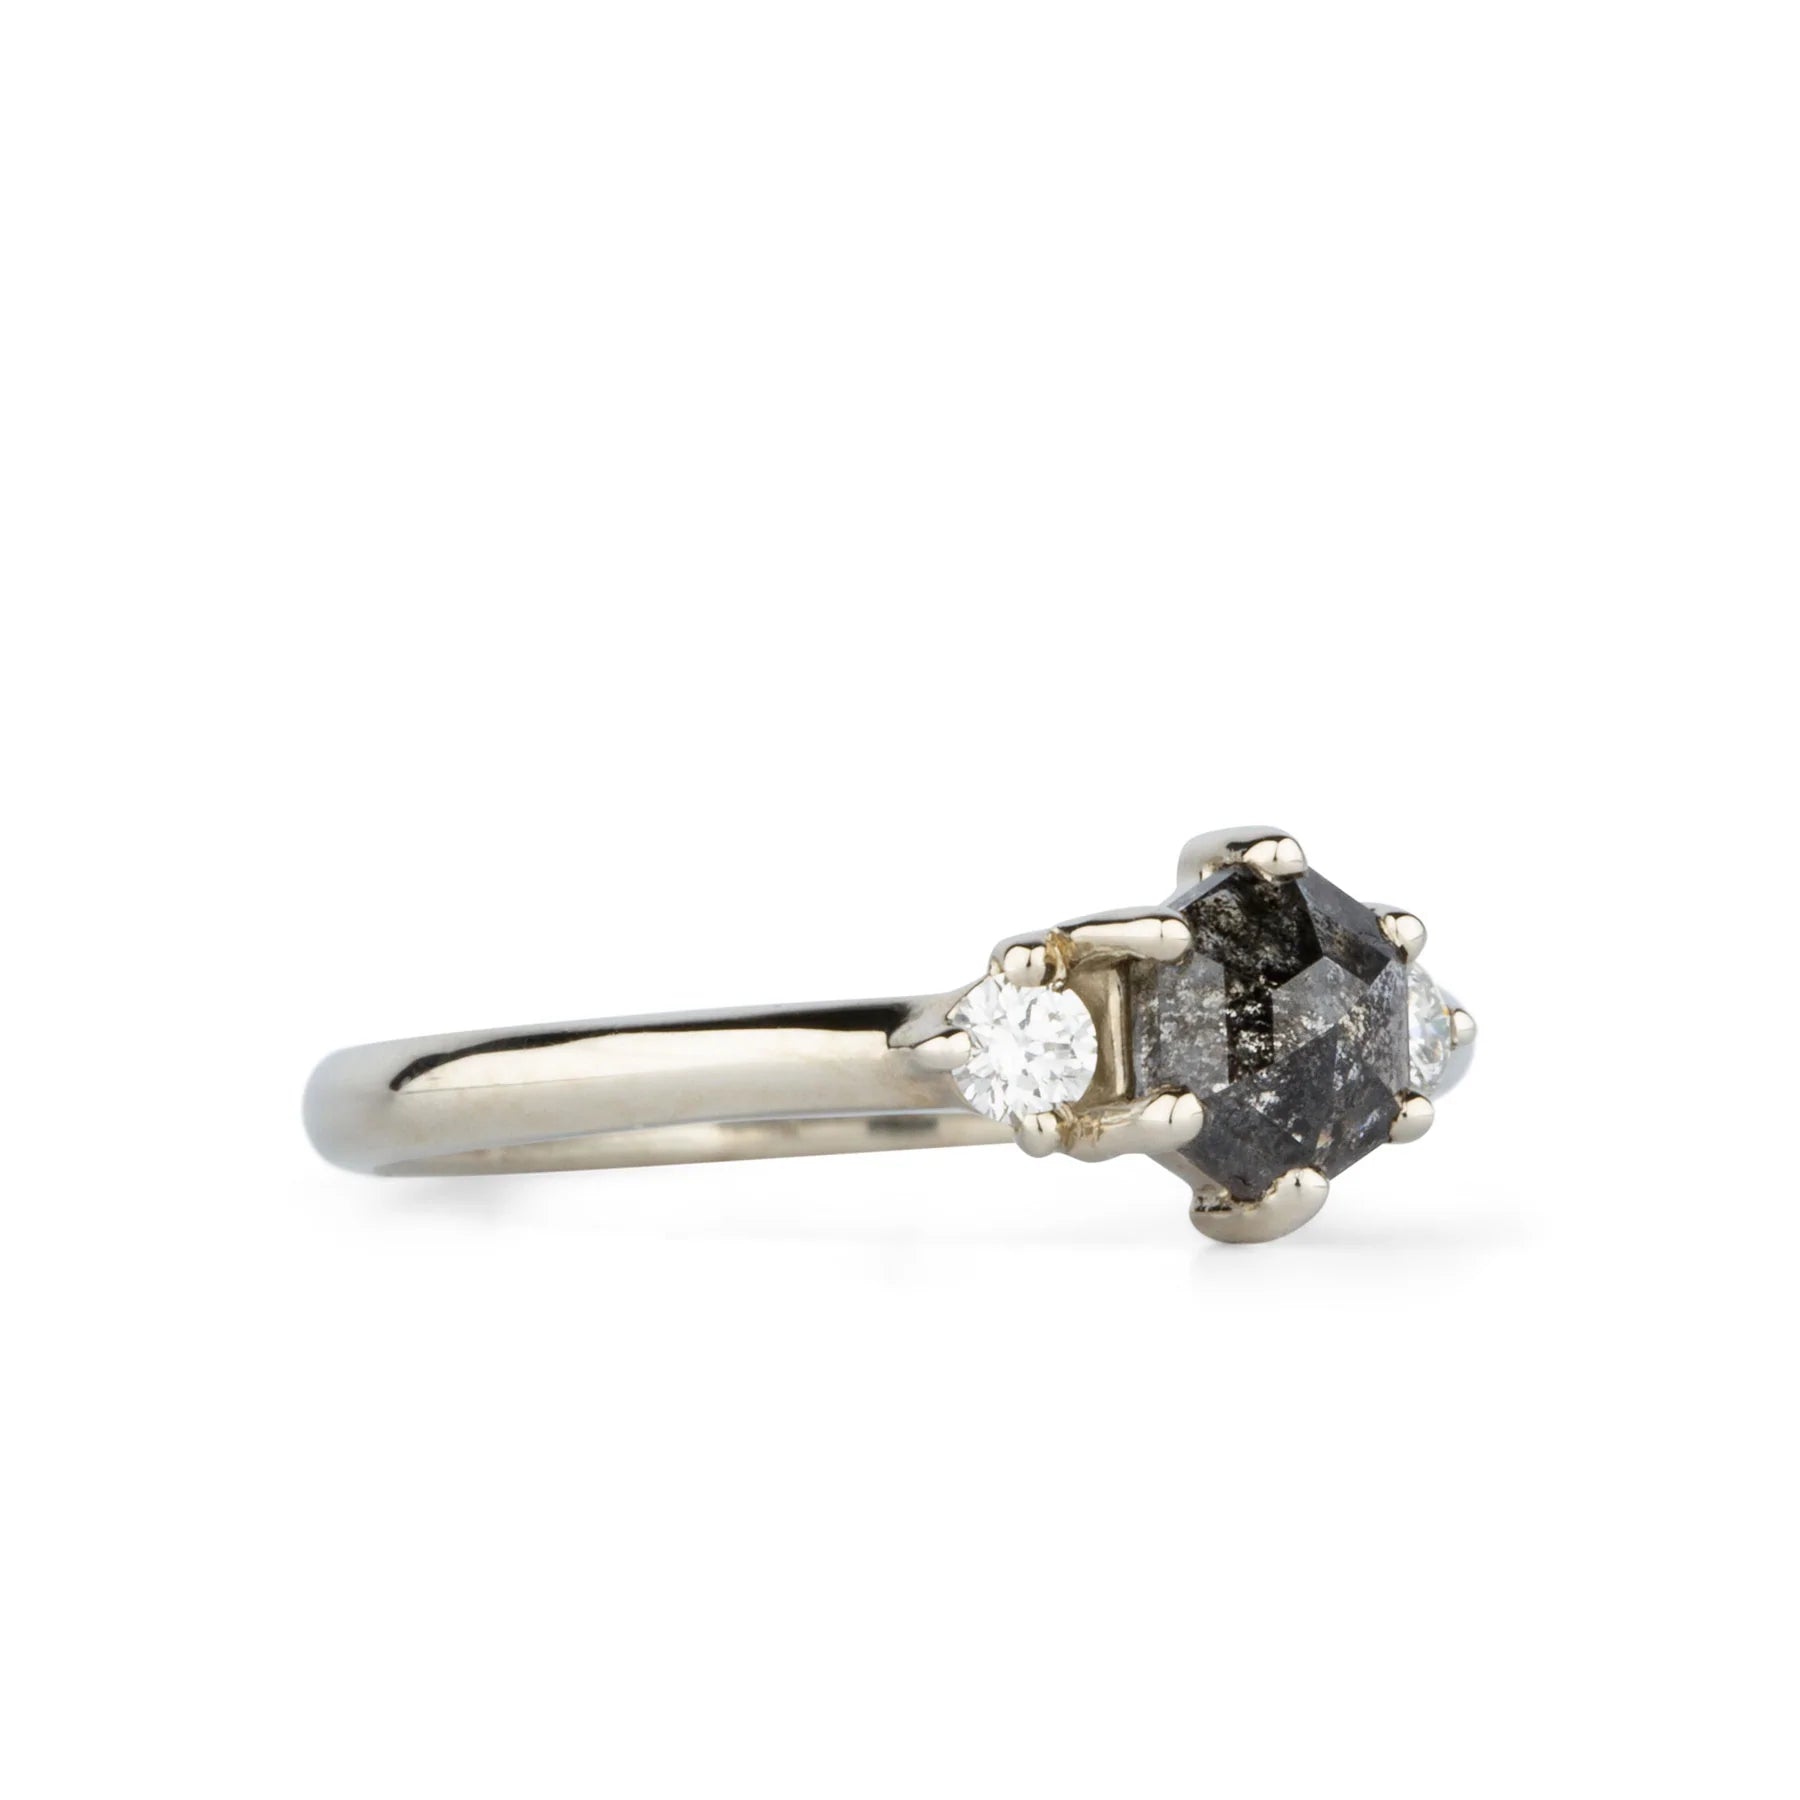  A .77 ct hexagon diamond is the center of this edgy ring as Canadian diamonds flank each side with sparkle.